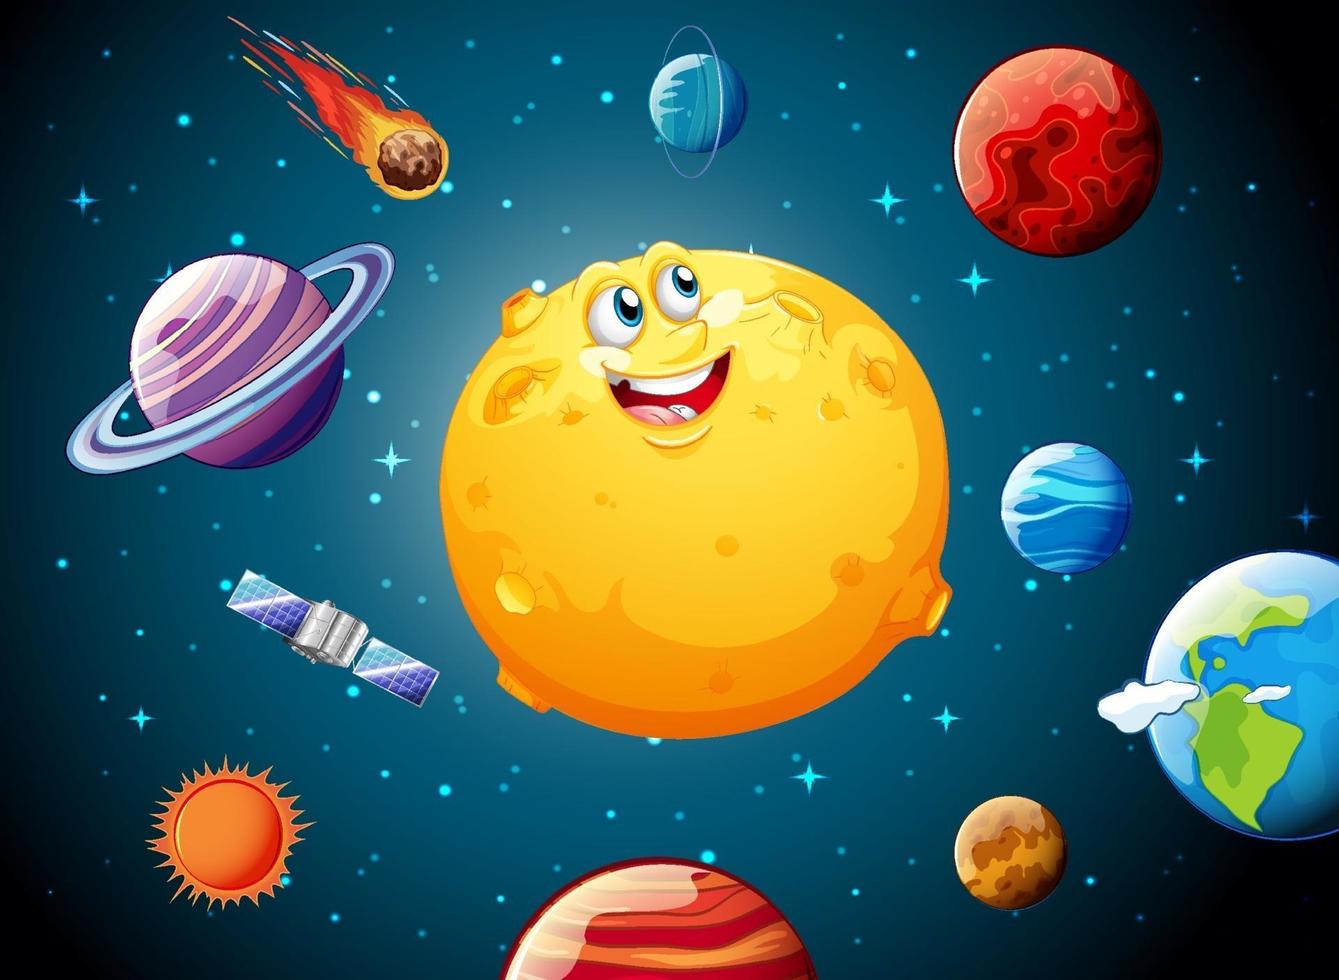 Moon with happy face on space galaxy theme background vector